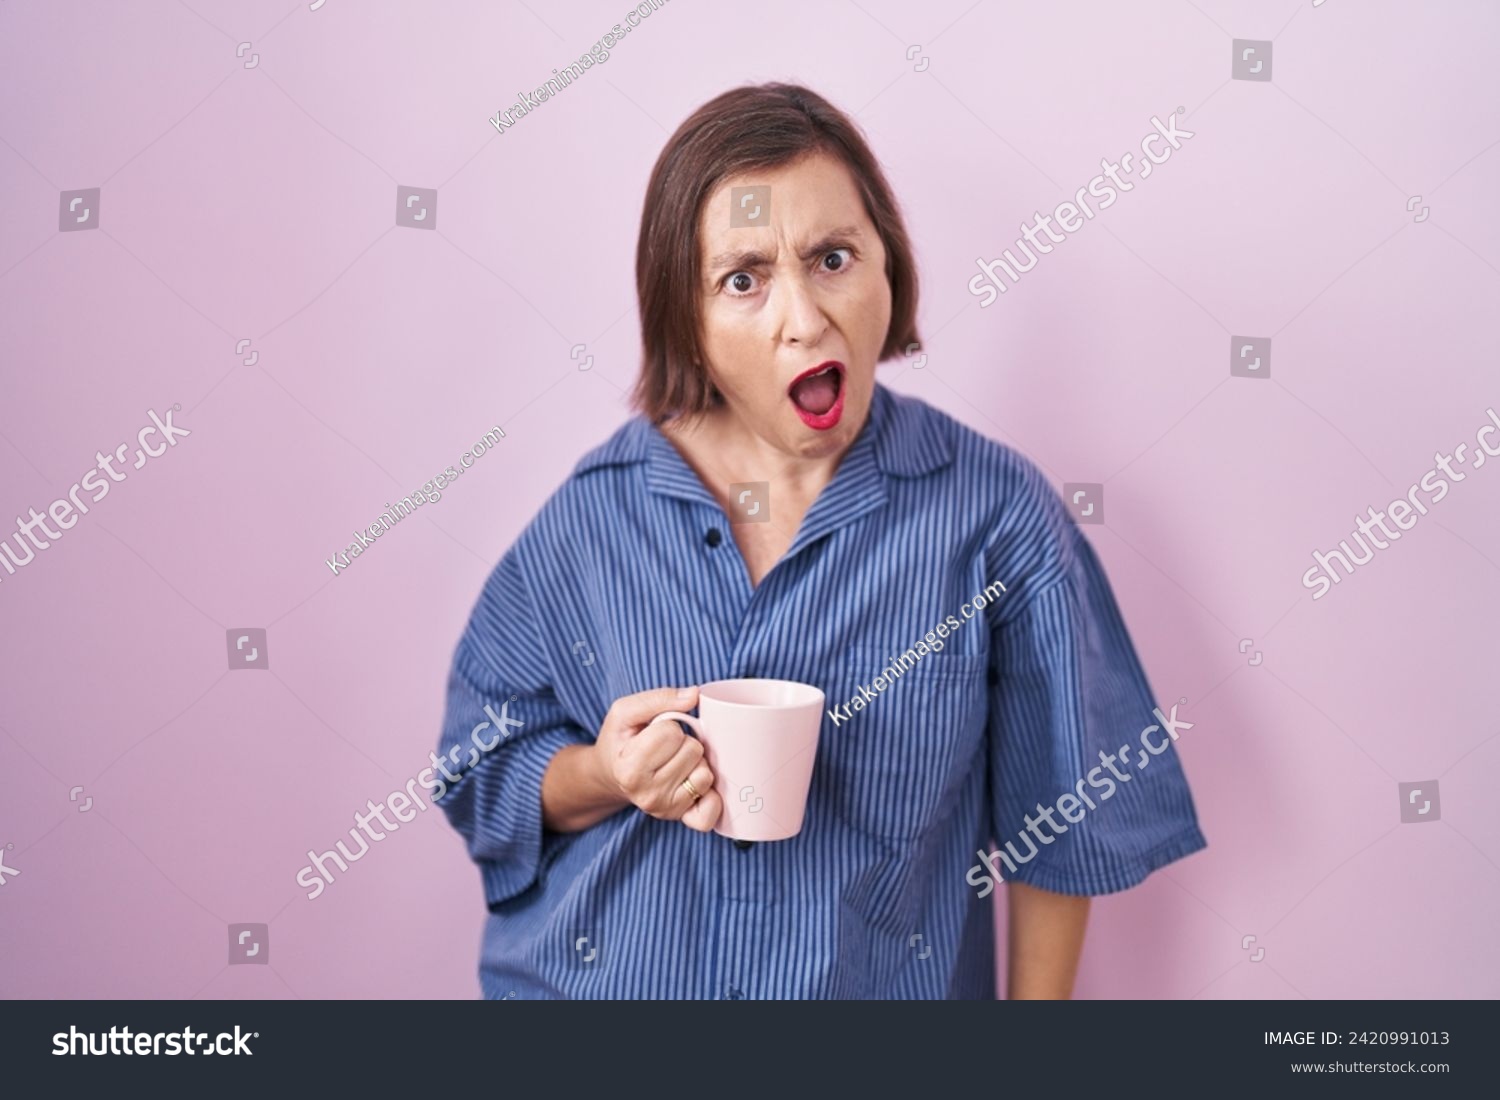 Middle age hispanic woman drinking a cup coffee in shock face, looking skeptical and sarcastic, surprised with open mouth  #2420991013